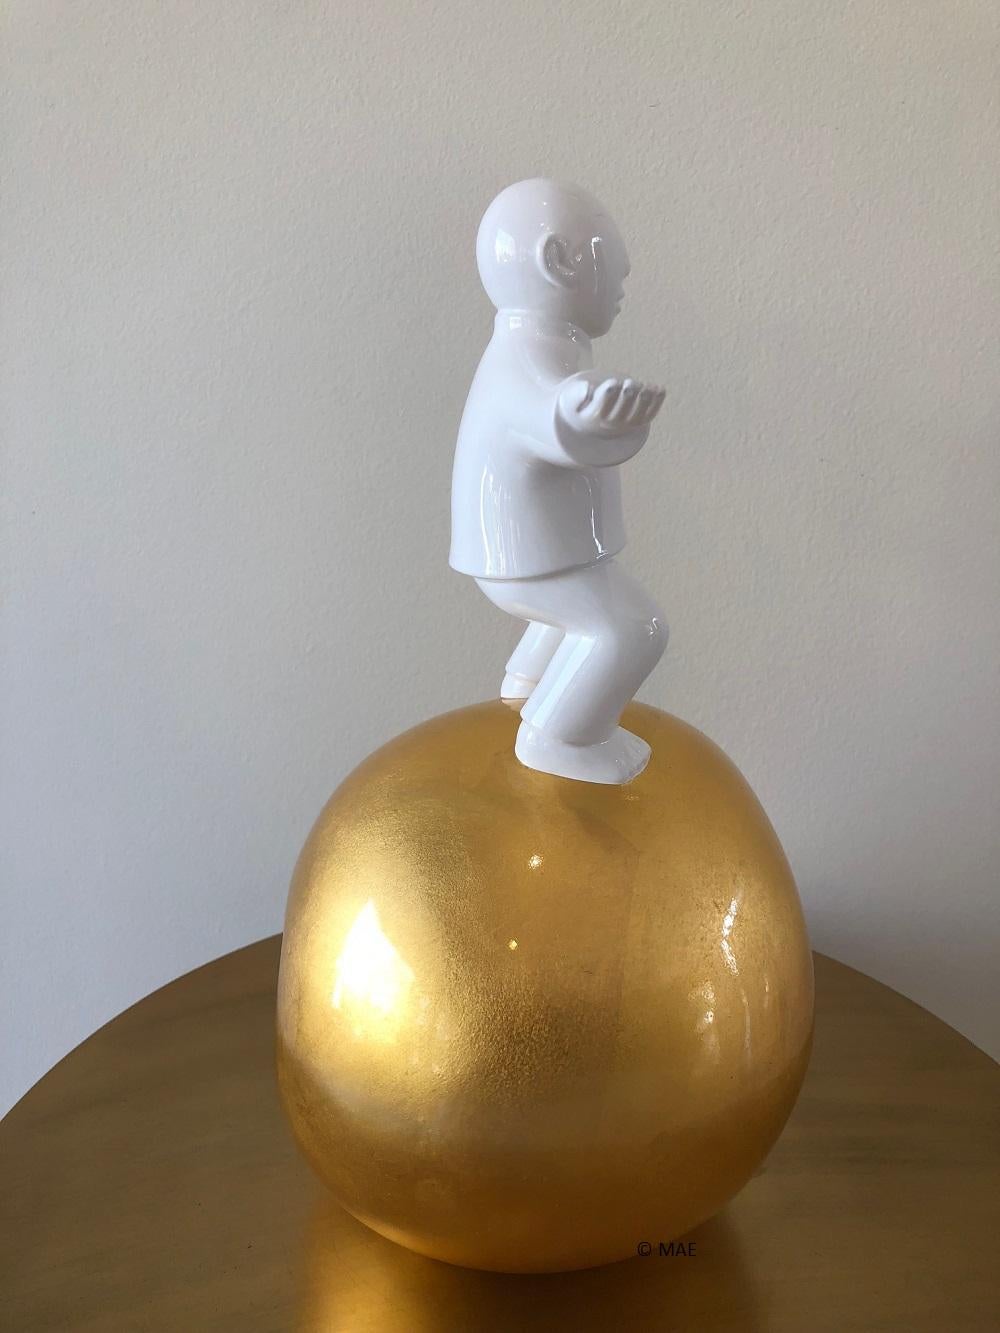 This is a fibre glass sculpture by the noted Chinese artist, Xie Ai Ge, that is hand laid with 99.99% gold leaf, varnished. The symbolic significance of this piece is as follows:

The Apple series in general symbolizes Man's will to overcome